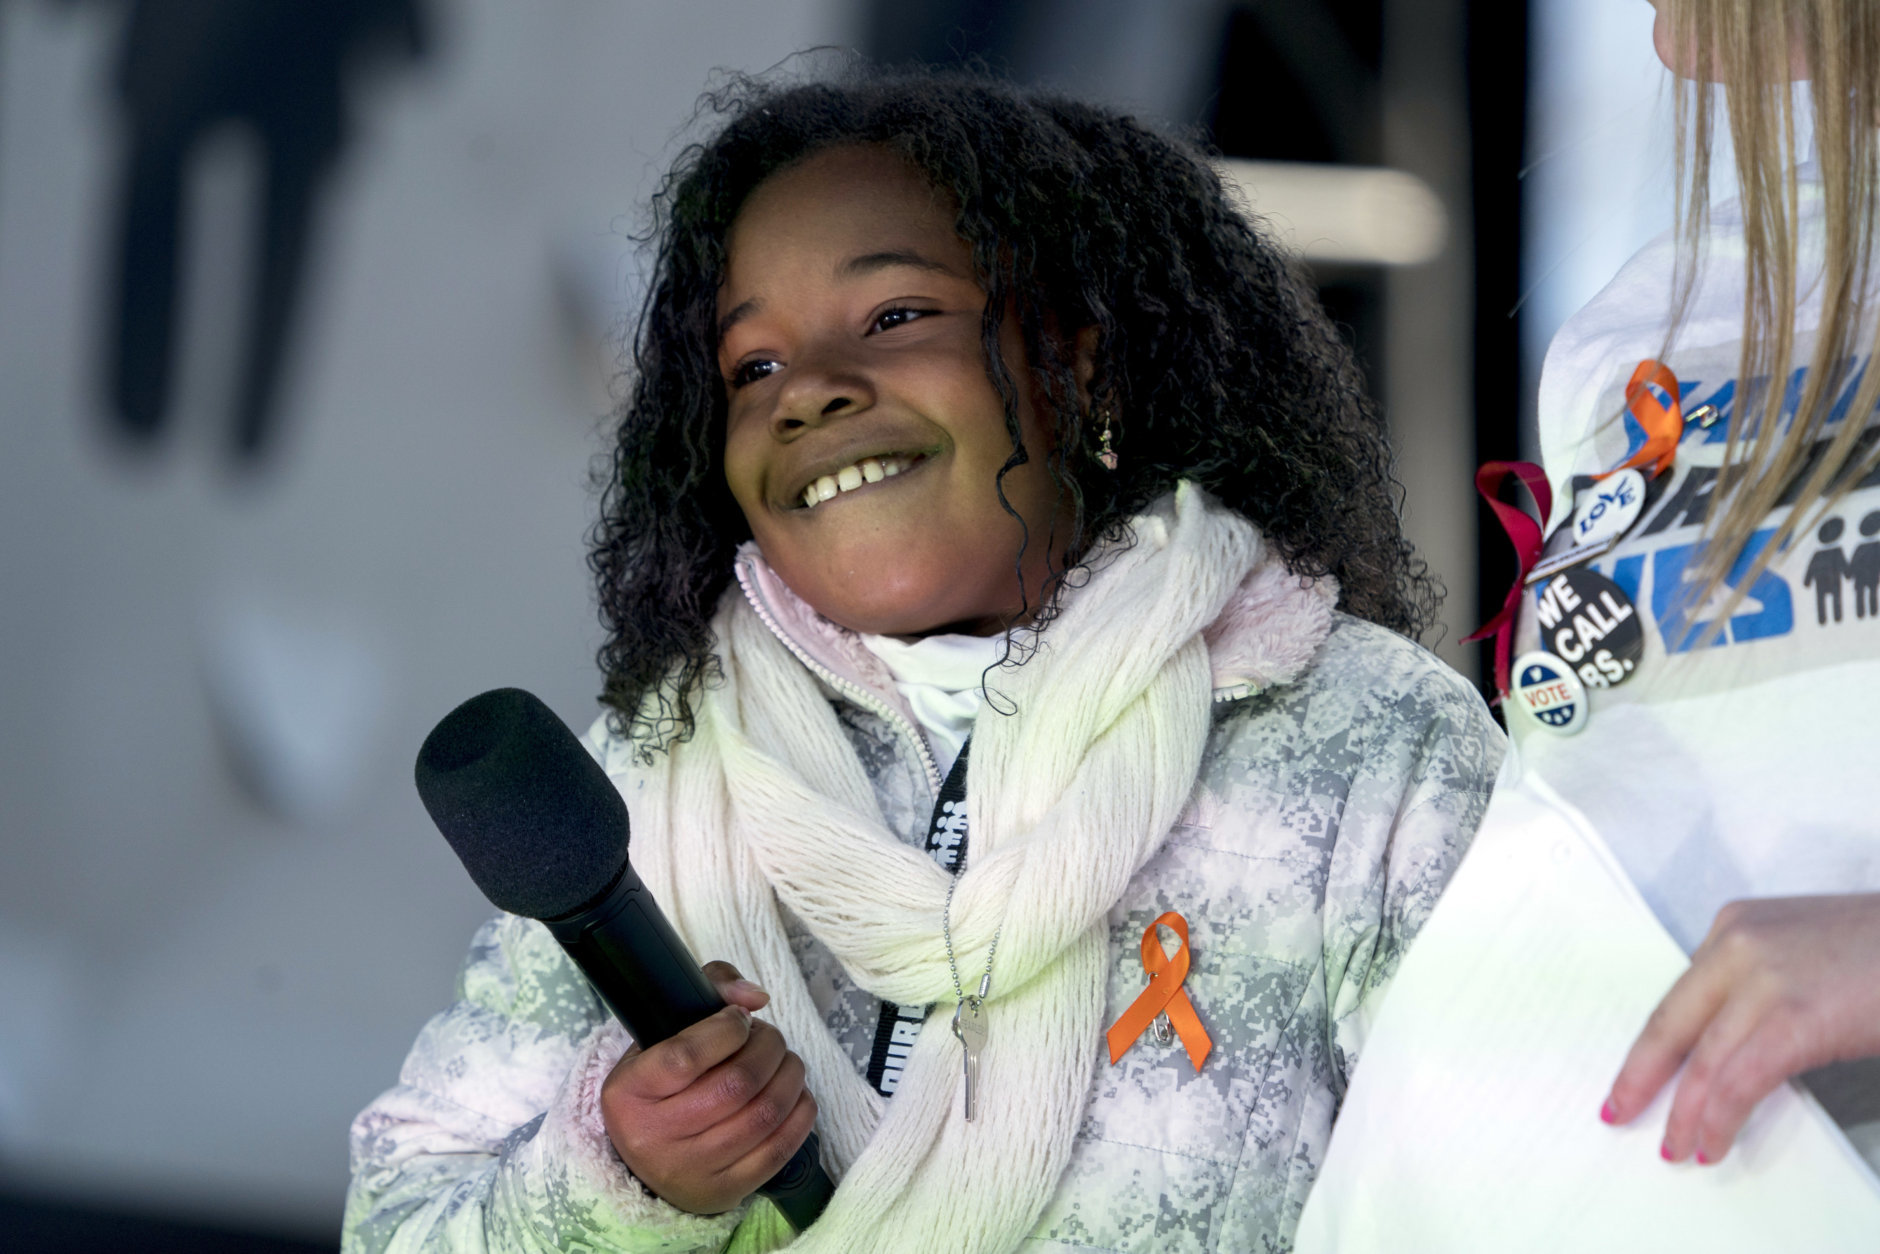 Yolanda Renee King, grand daughter of Martin Luther King Jr., speaks during the "March for Our Lives" rally in support of gun control in Washington, Saturday, March 24, 2018. (AP Photo/Andrew Harnik)